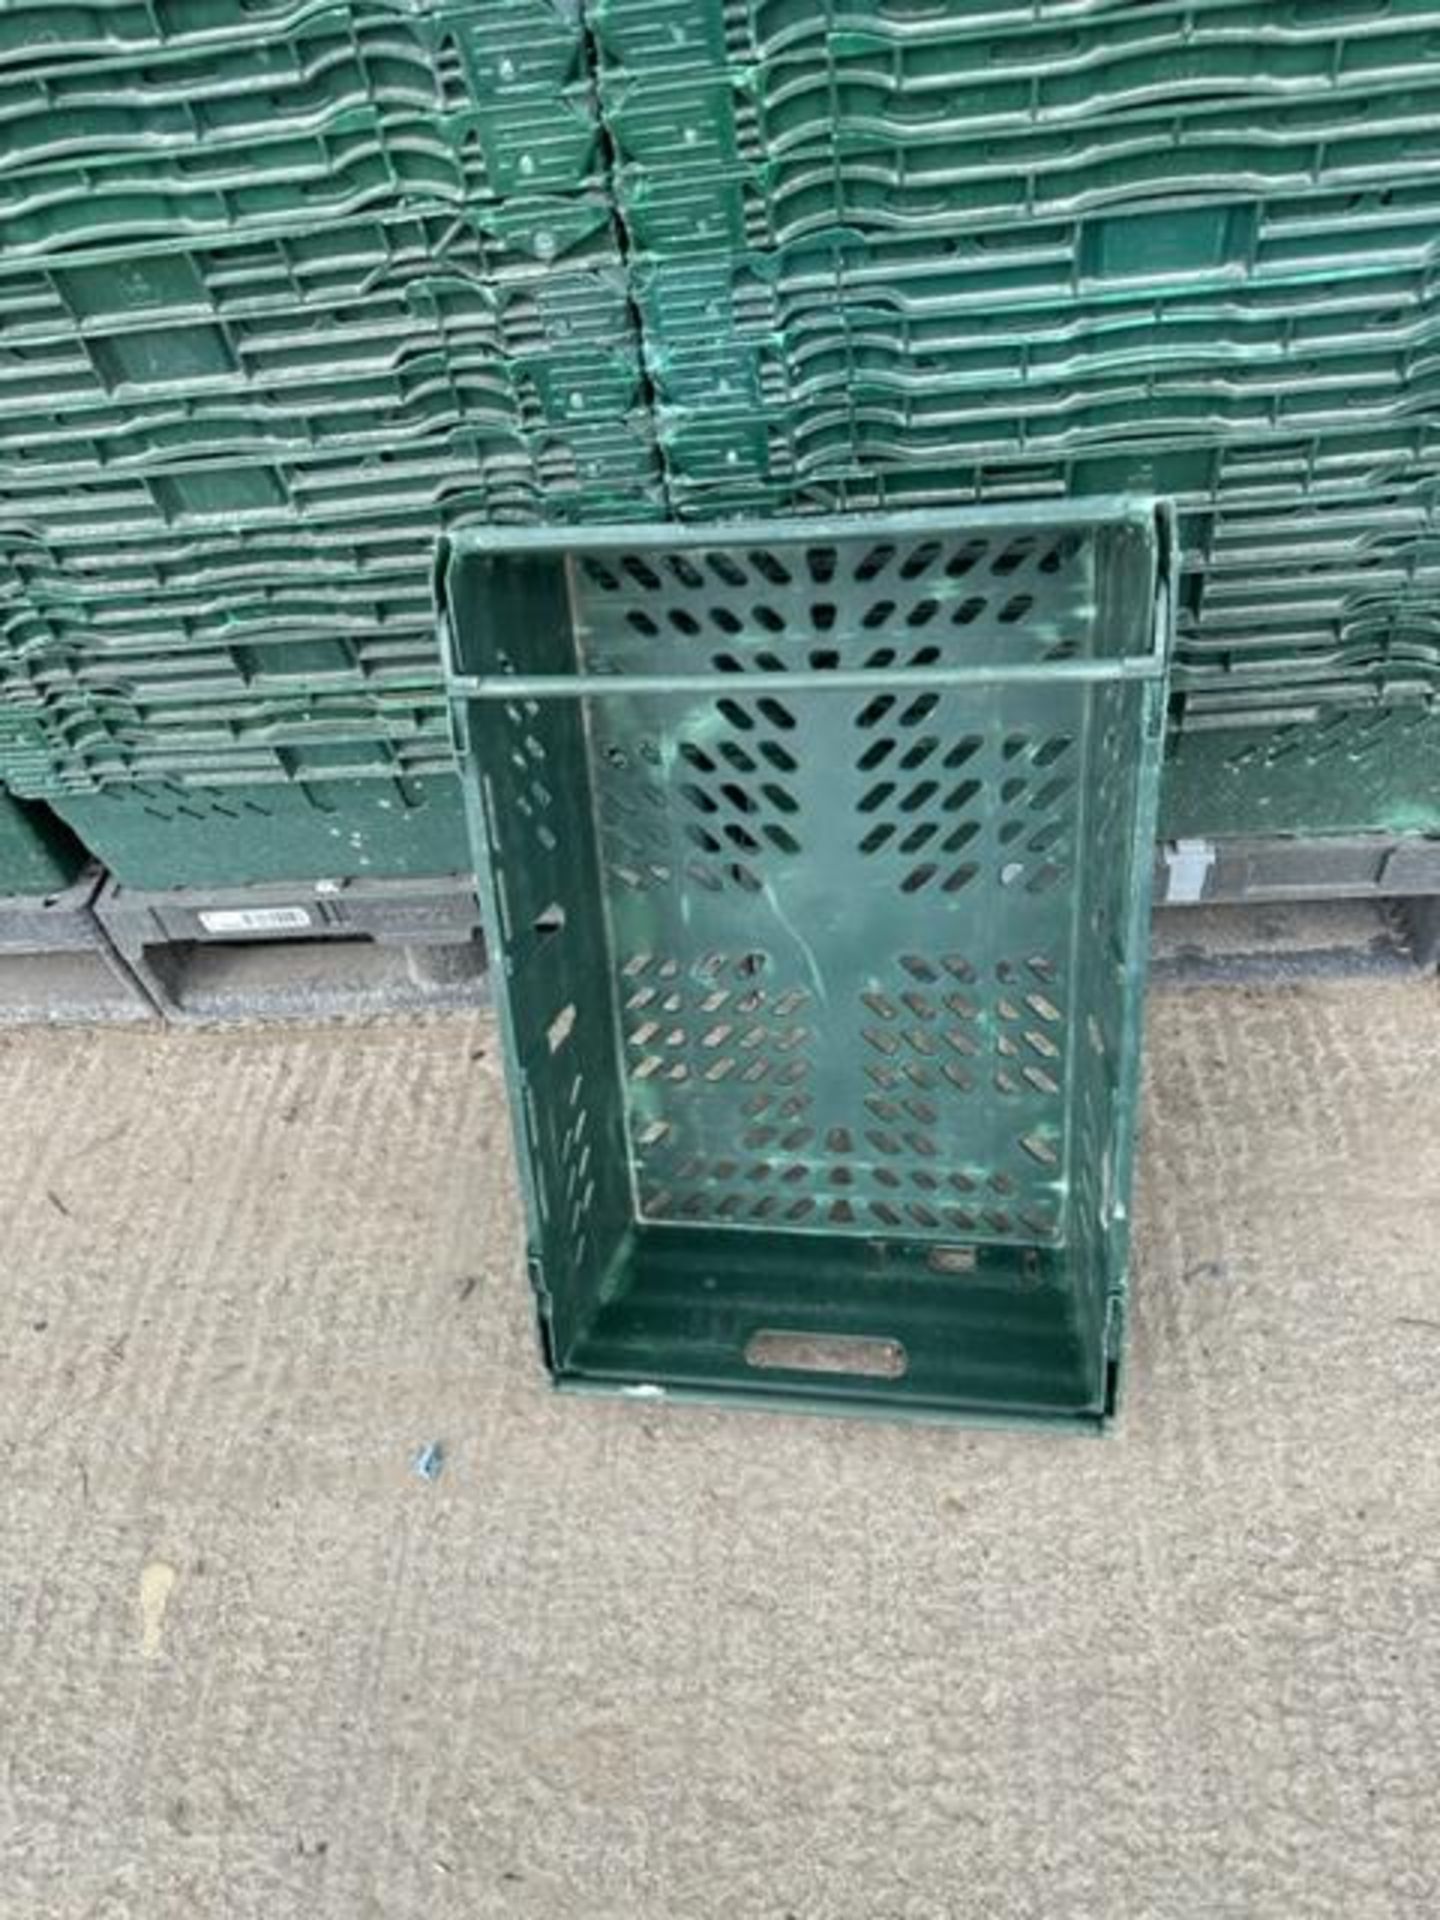 2 x HALF PALLETS CONTAINING 2 STACKS OF 70 TRAYS. (140 TRAYS). - Image 2 of 2